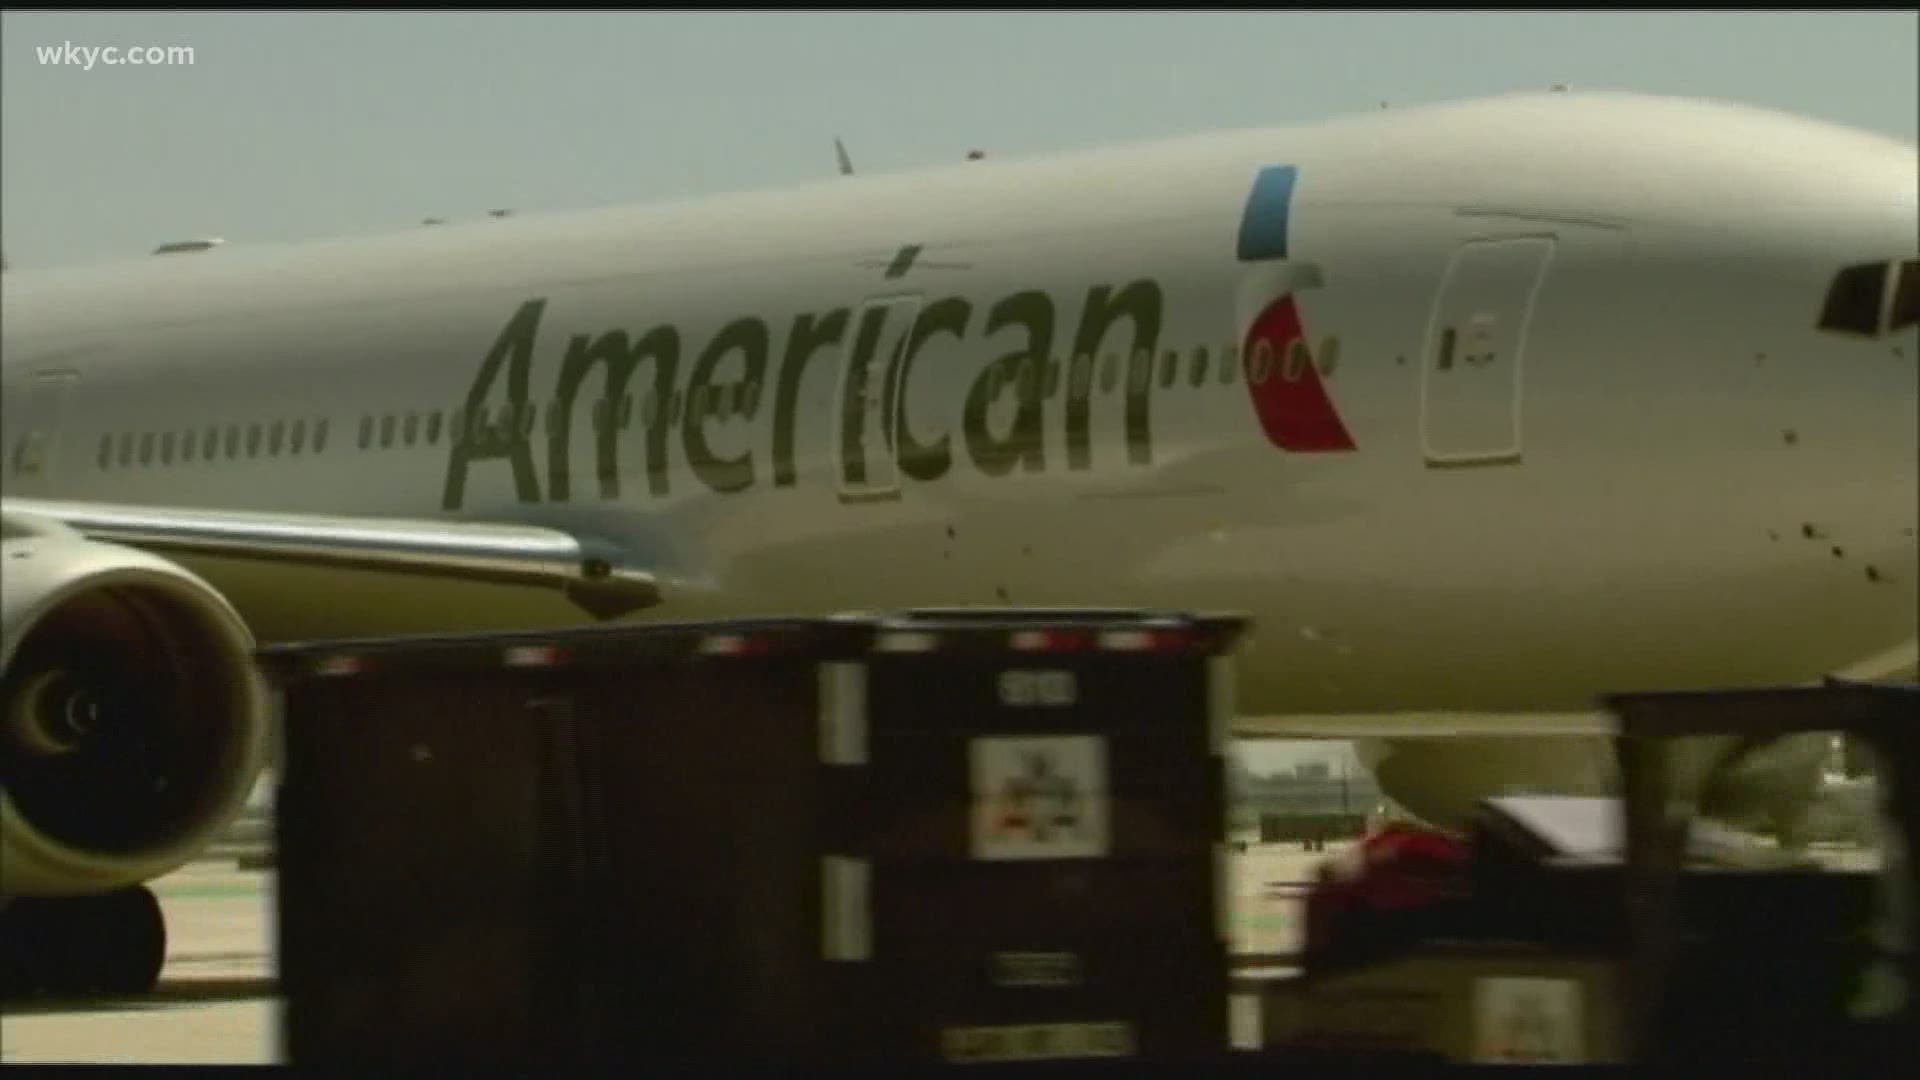 American said Friday that it will continue to notify customers if their flight is likely to be full. They'll let passengers change flights at no extra cost.